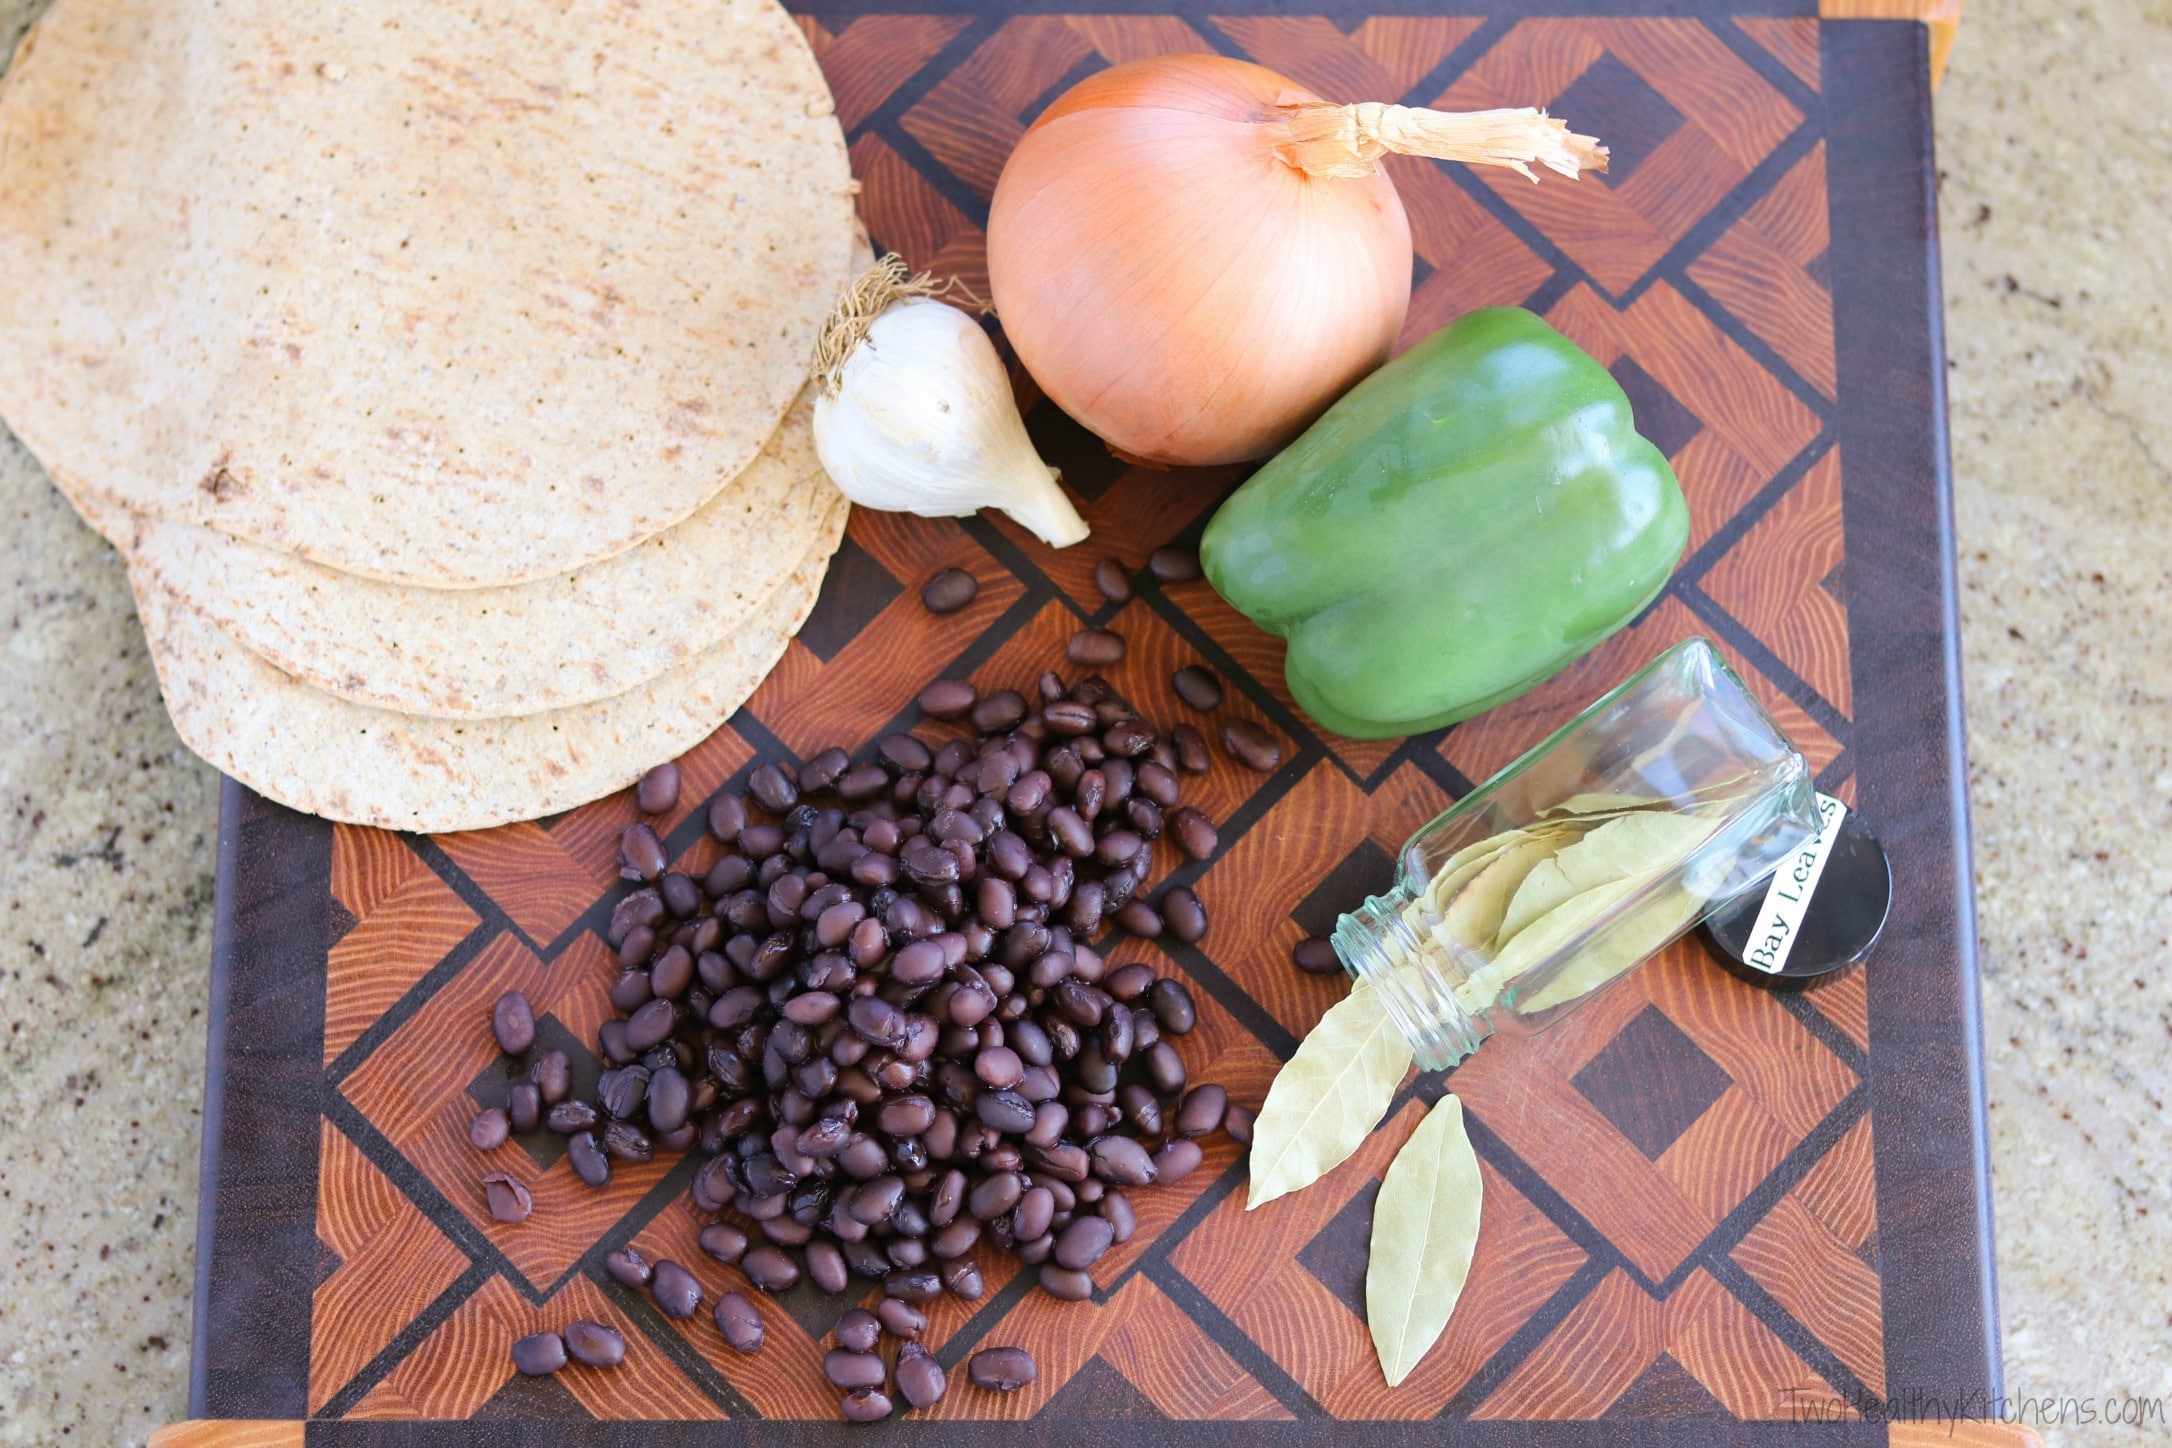 Ingredients on cutting board - black beans, vegetables, flatbreads and jar of bay leaves.